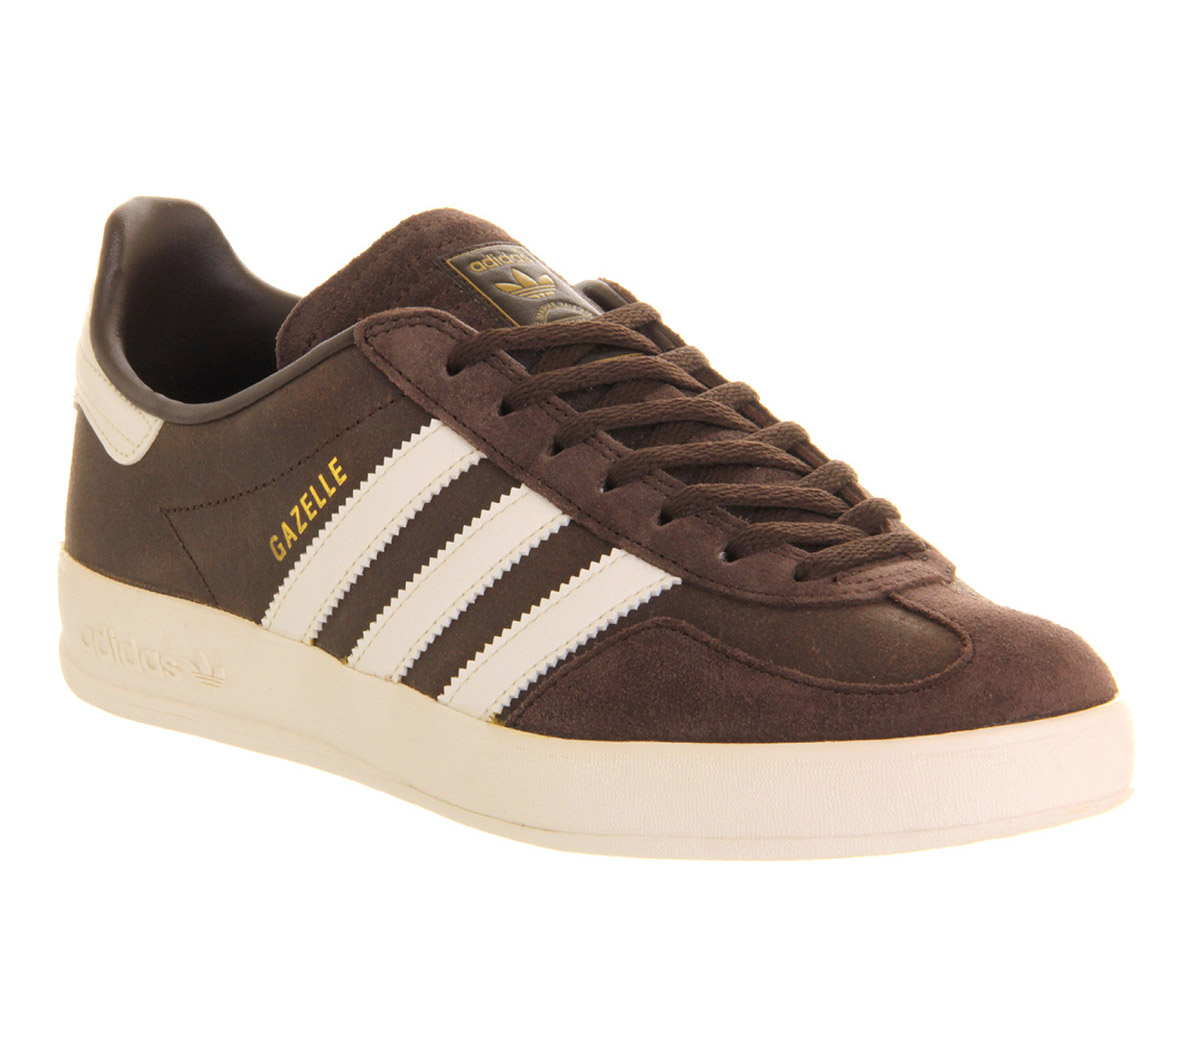 brown gazelle trainers